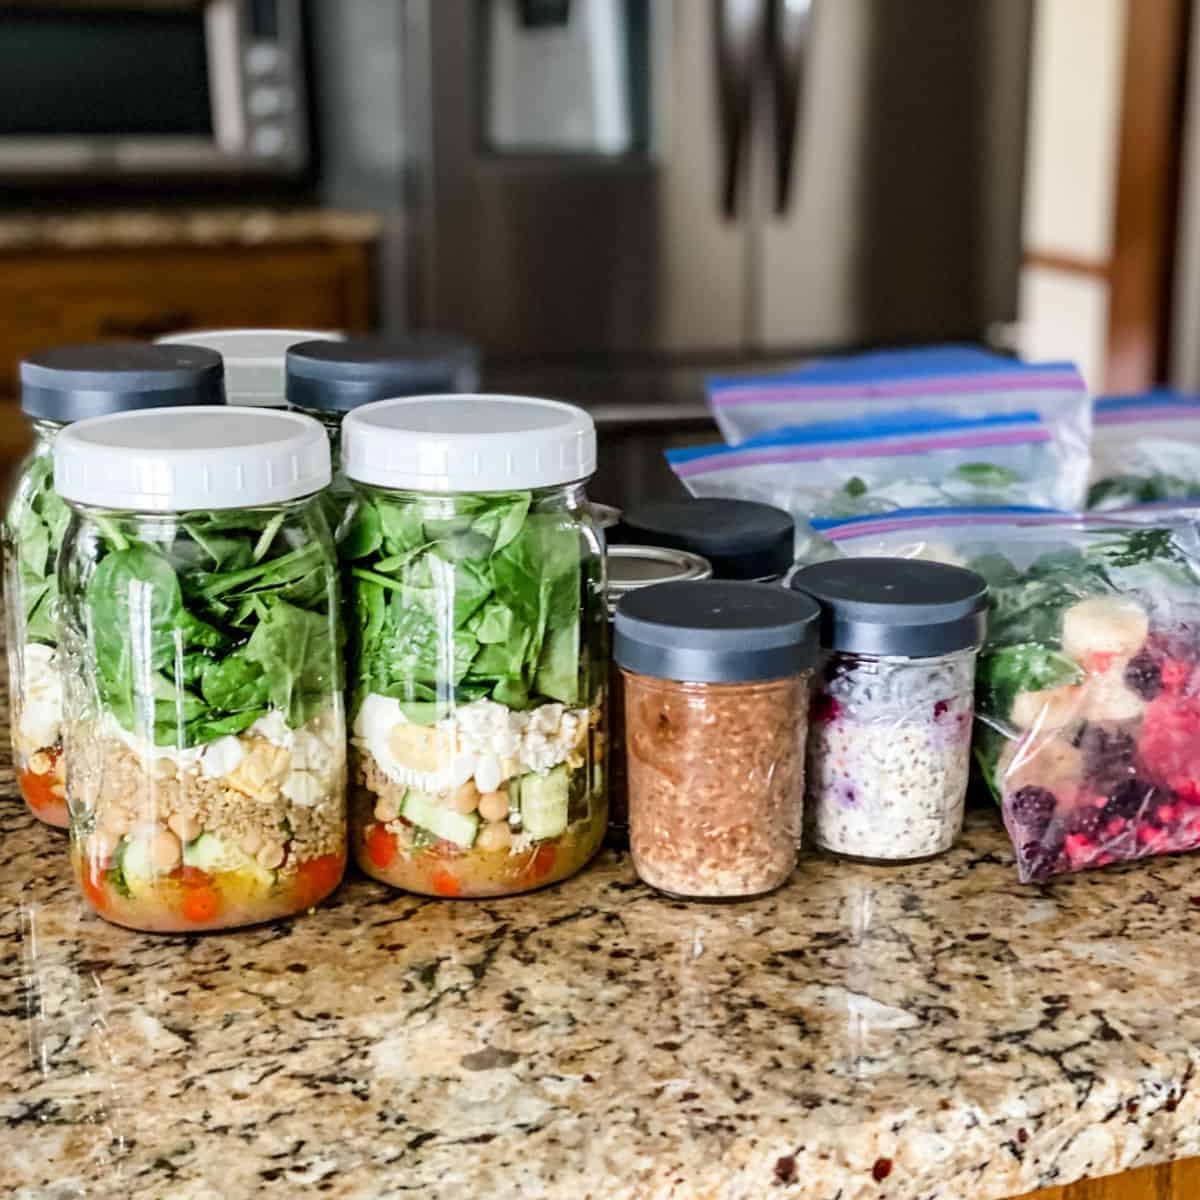 meal prep for the week on the kitchen counter.